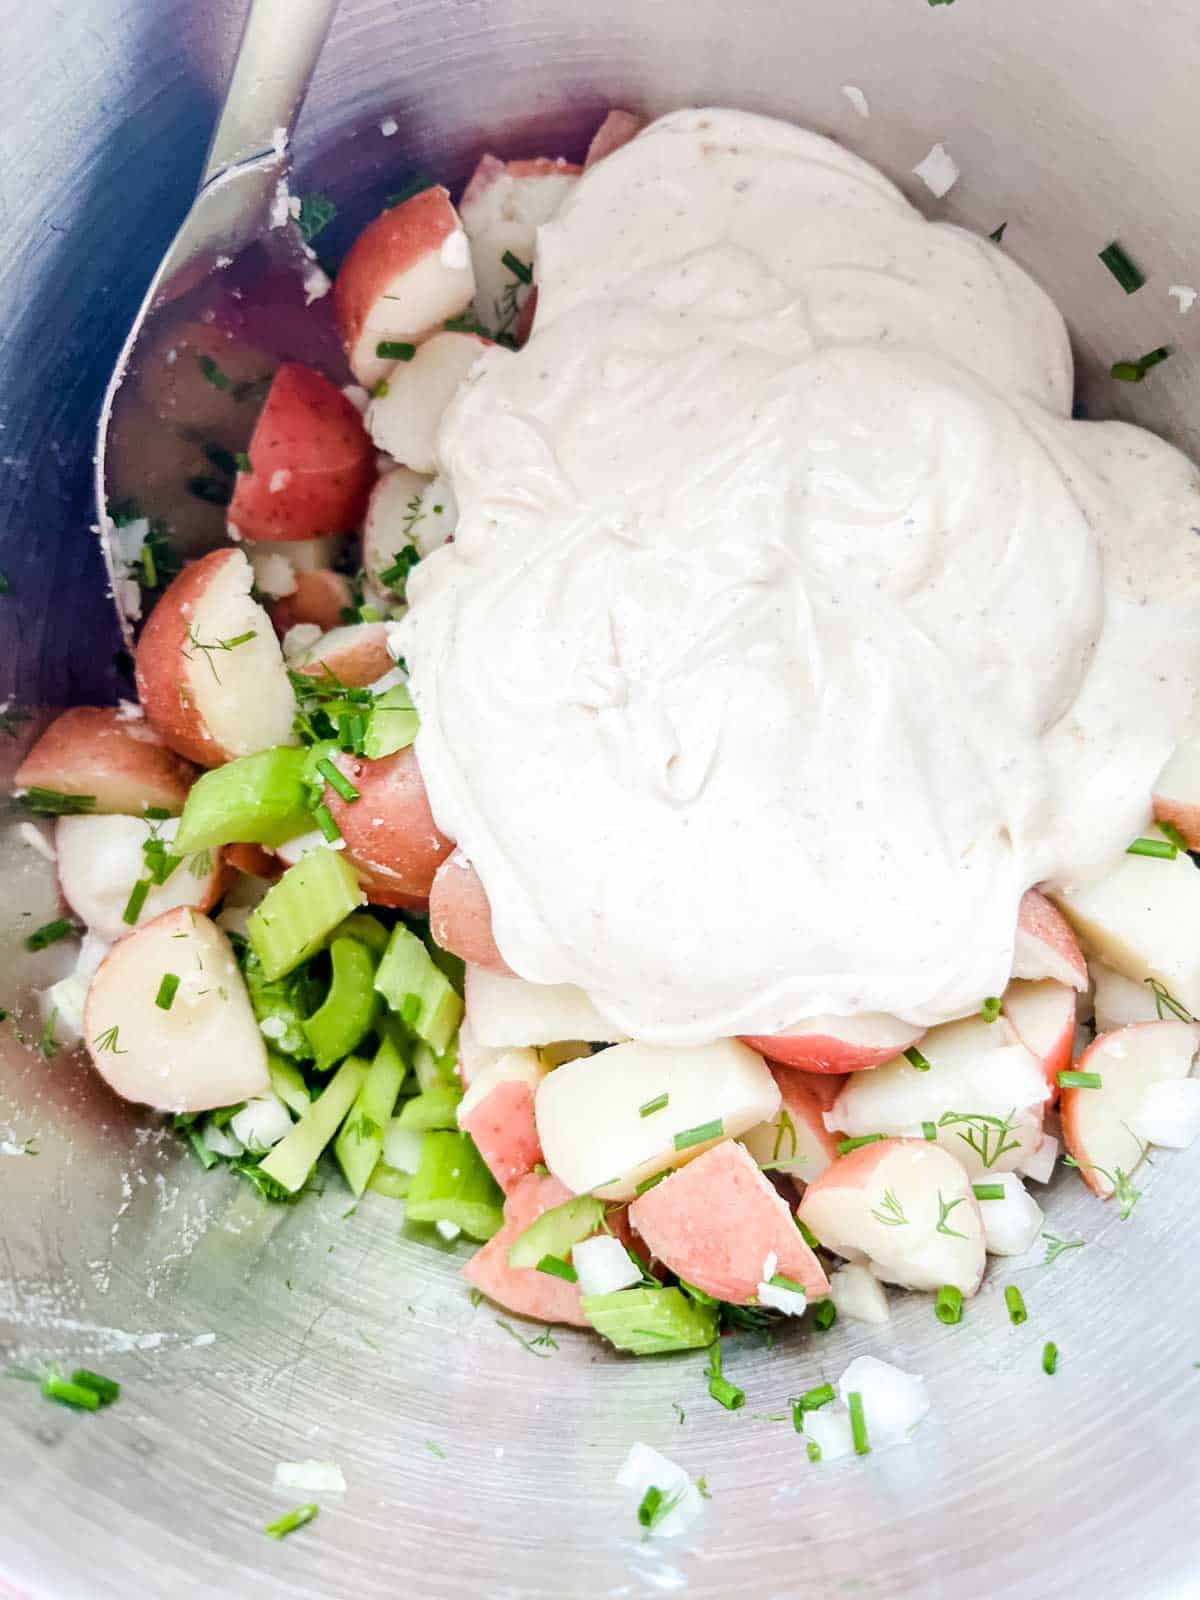 Photo of sour cream dressing that has been poured over potato salad in a bowl.